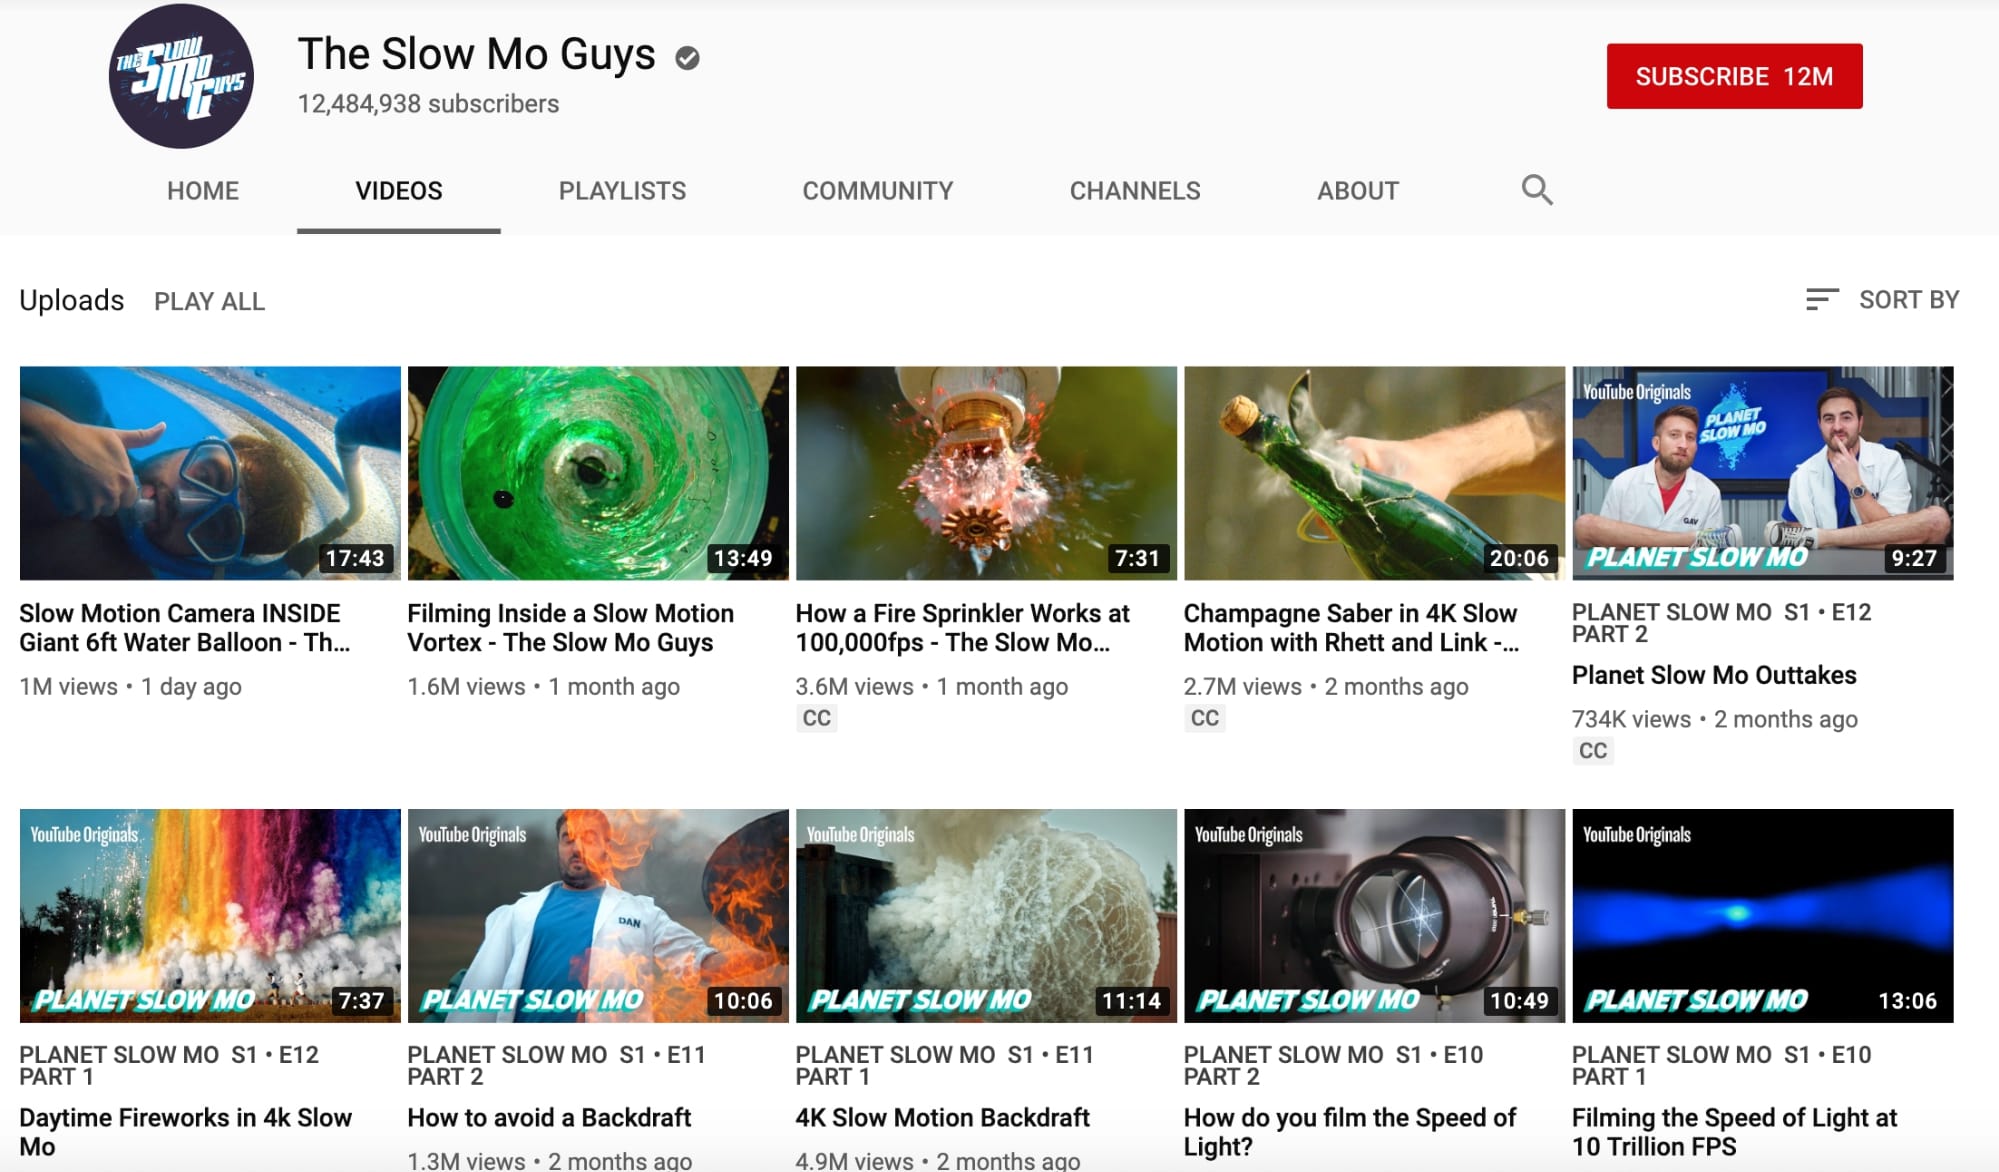 the slow mo guys use action shots in their youtube thumbnails